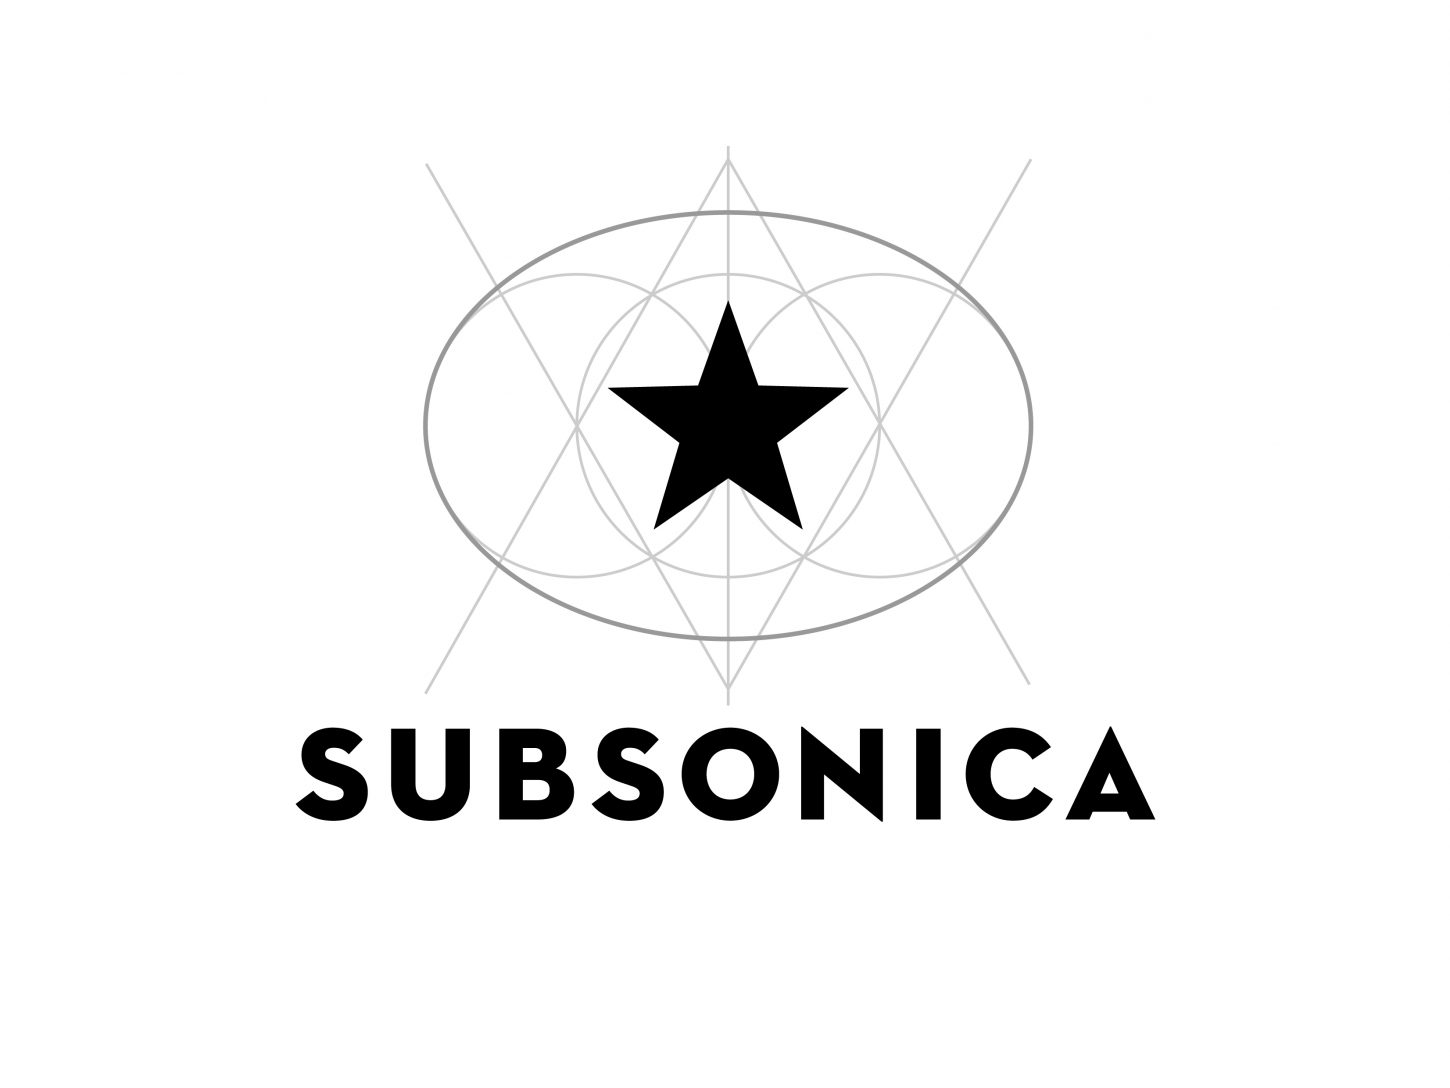 Subsonica – BRH+ Architecture. Design. And More.